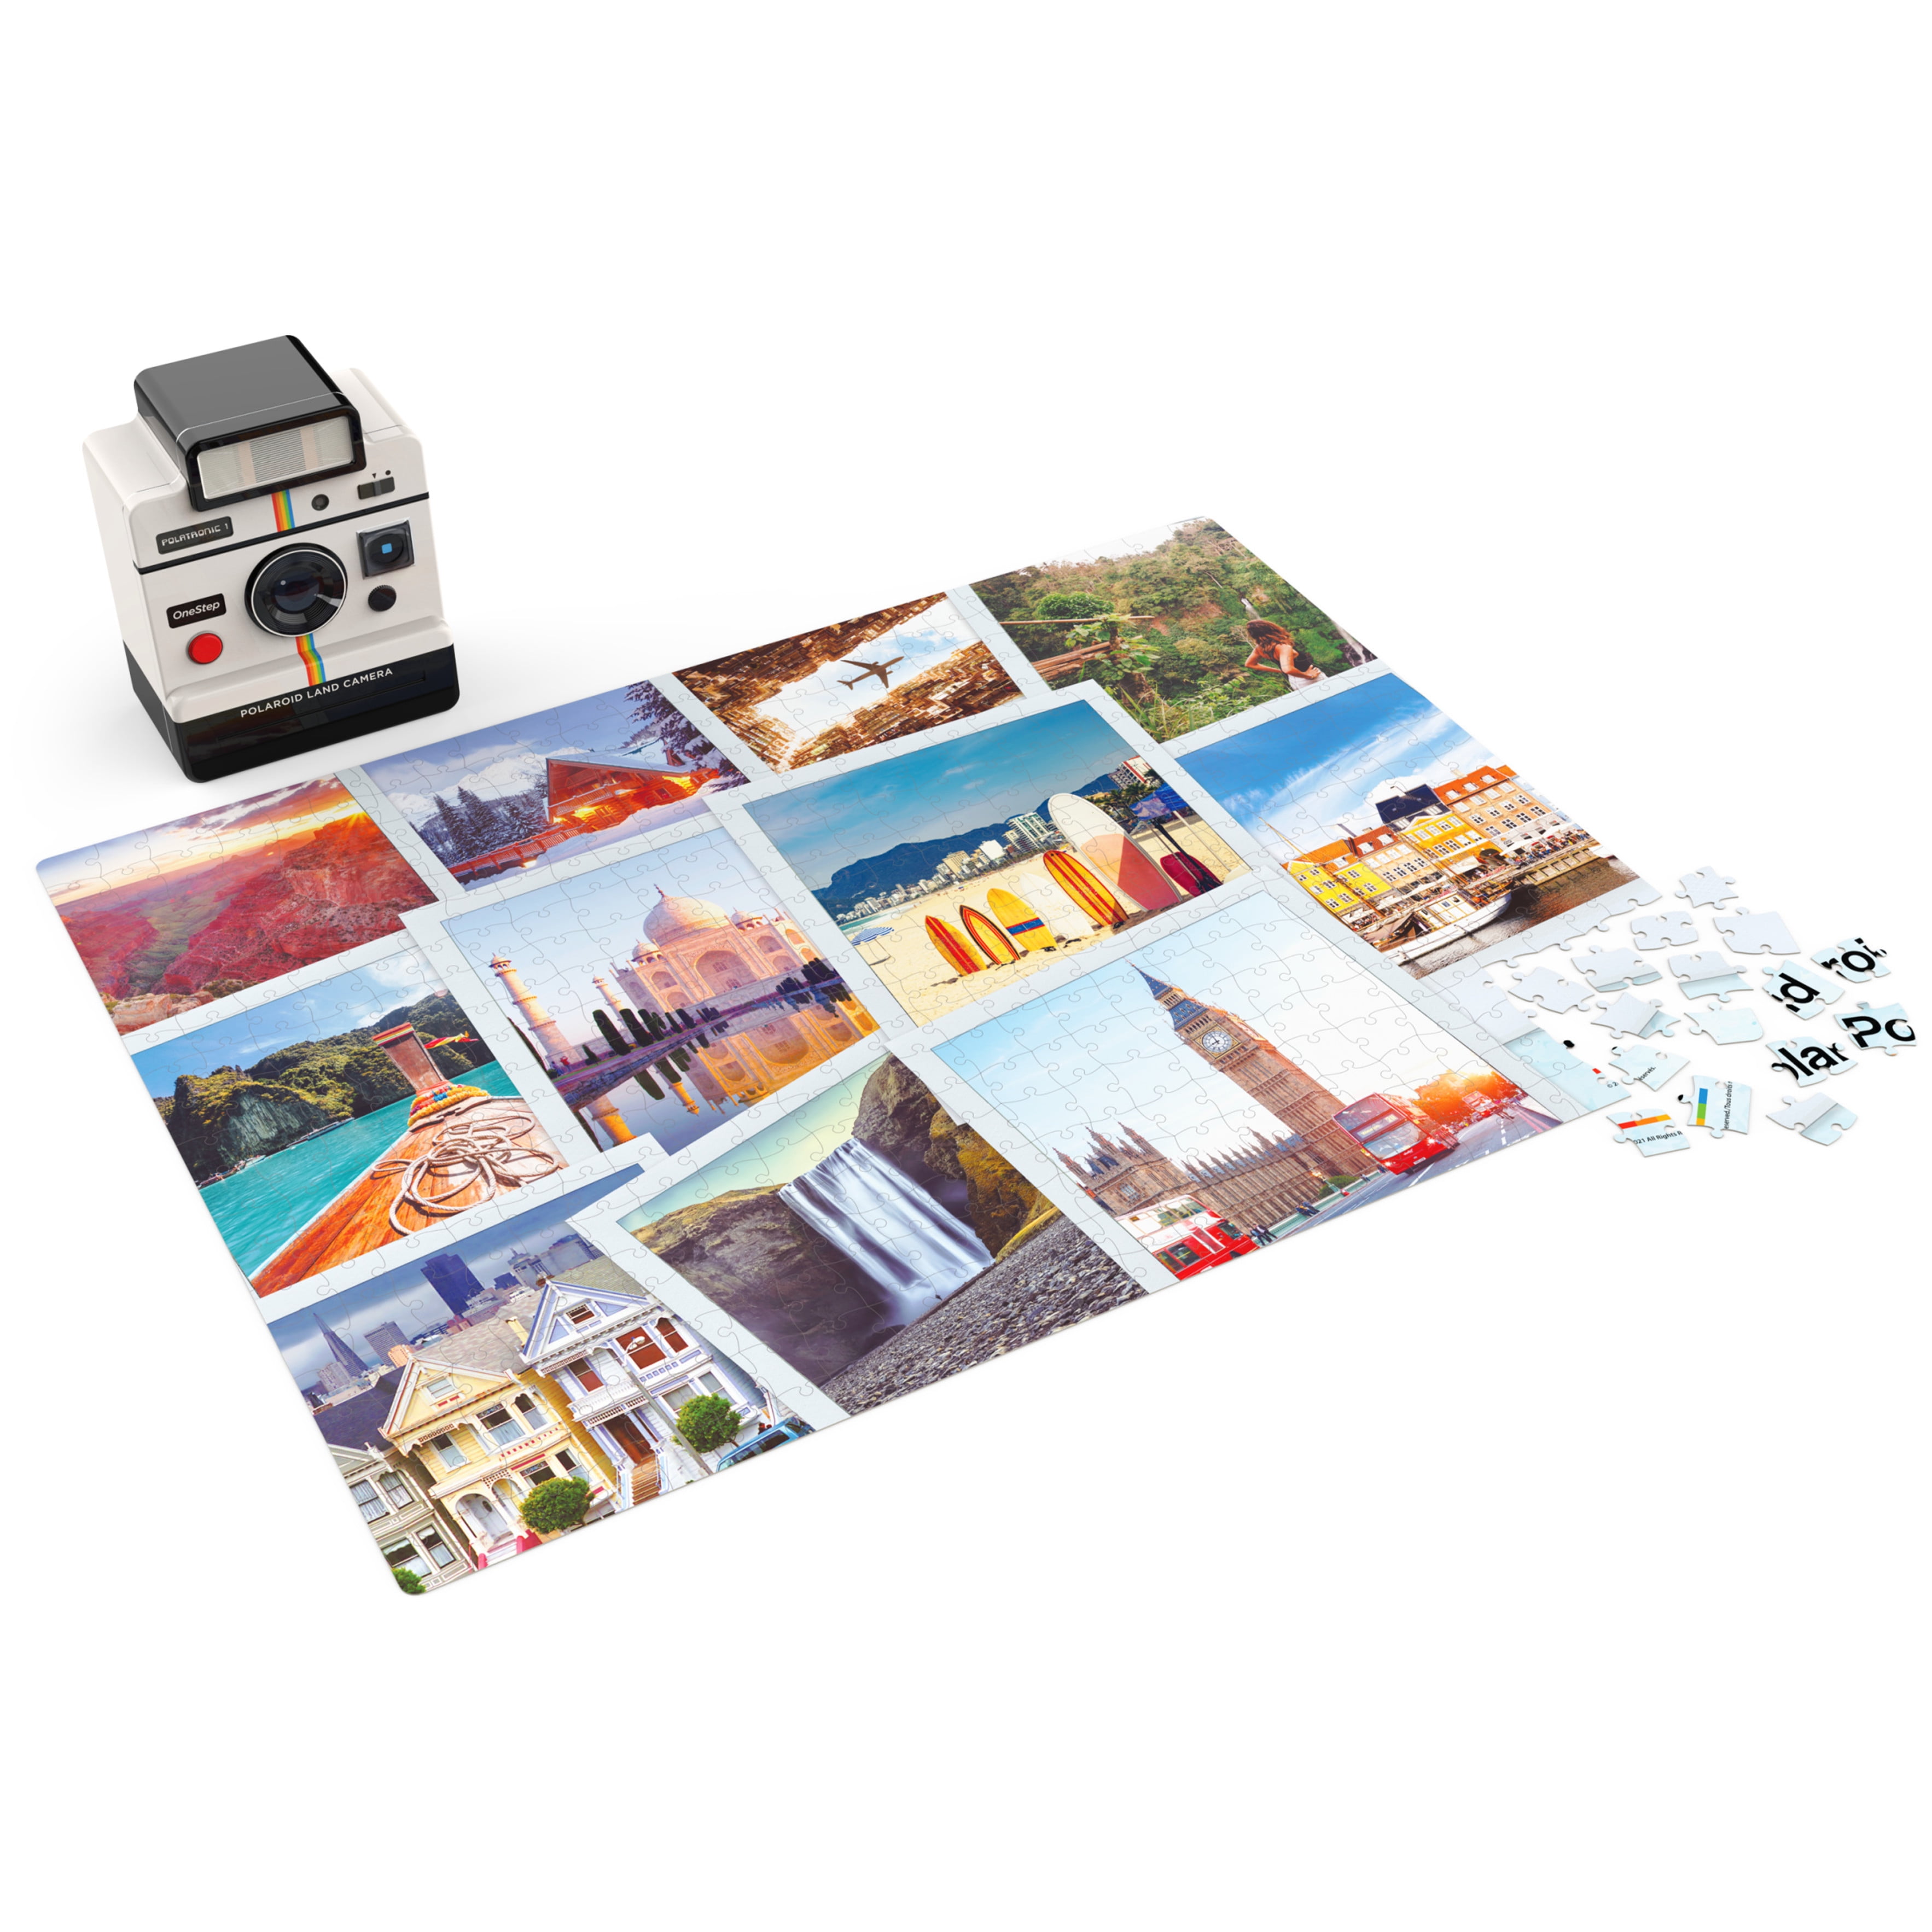 Polaroid, 500-Piece Puzzle Tin Camera Container, for Ages 12 and up